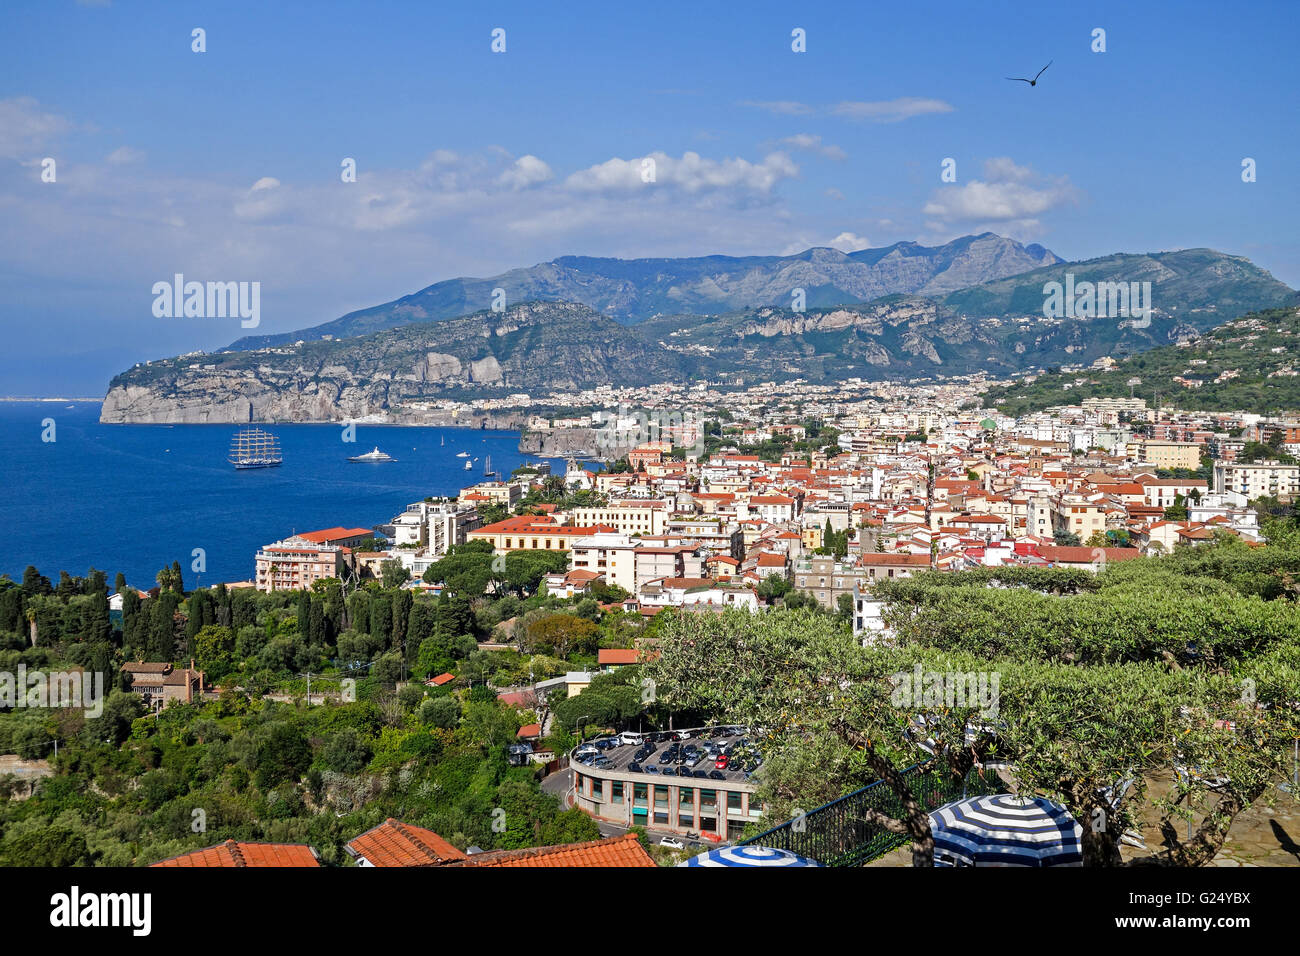 A view over the town of Sorrento towards the Bay of Naples on the Sorrentine Peninsula Campania Italy Europe Stock Photo